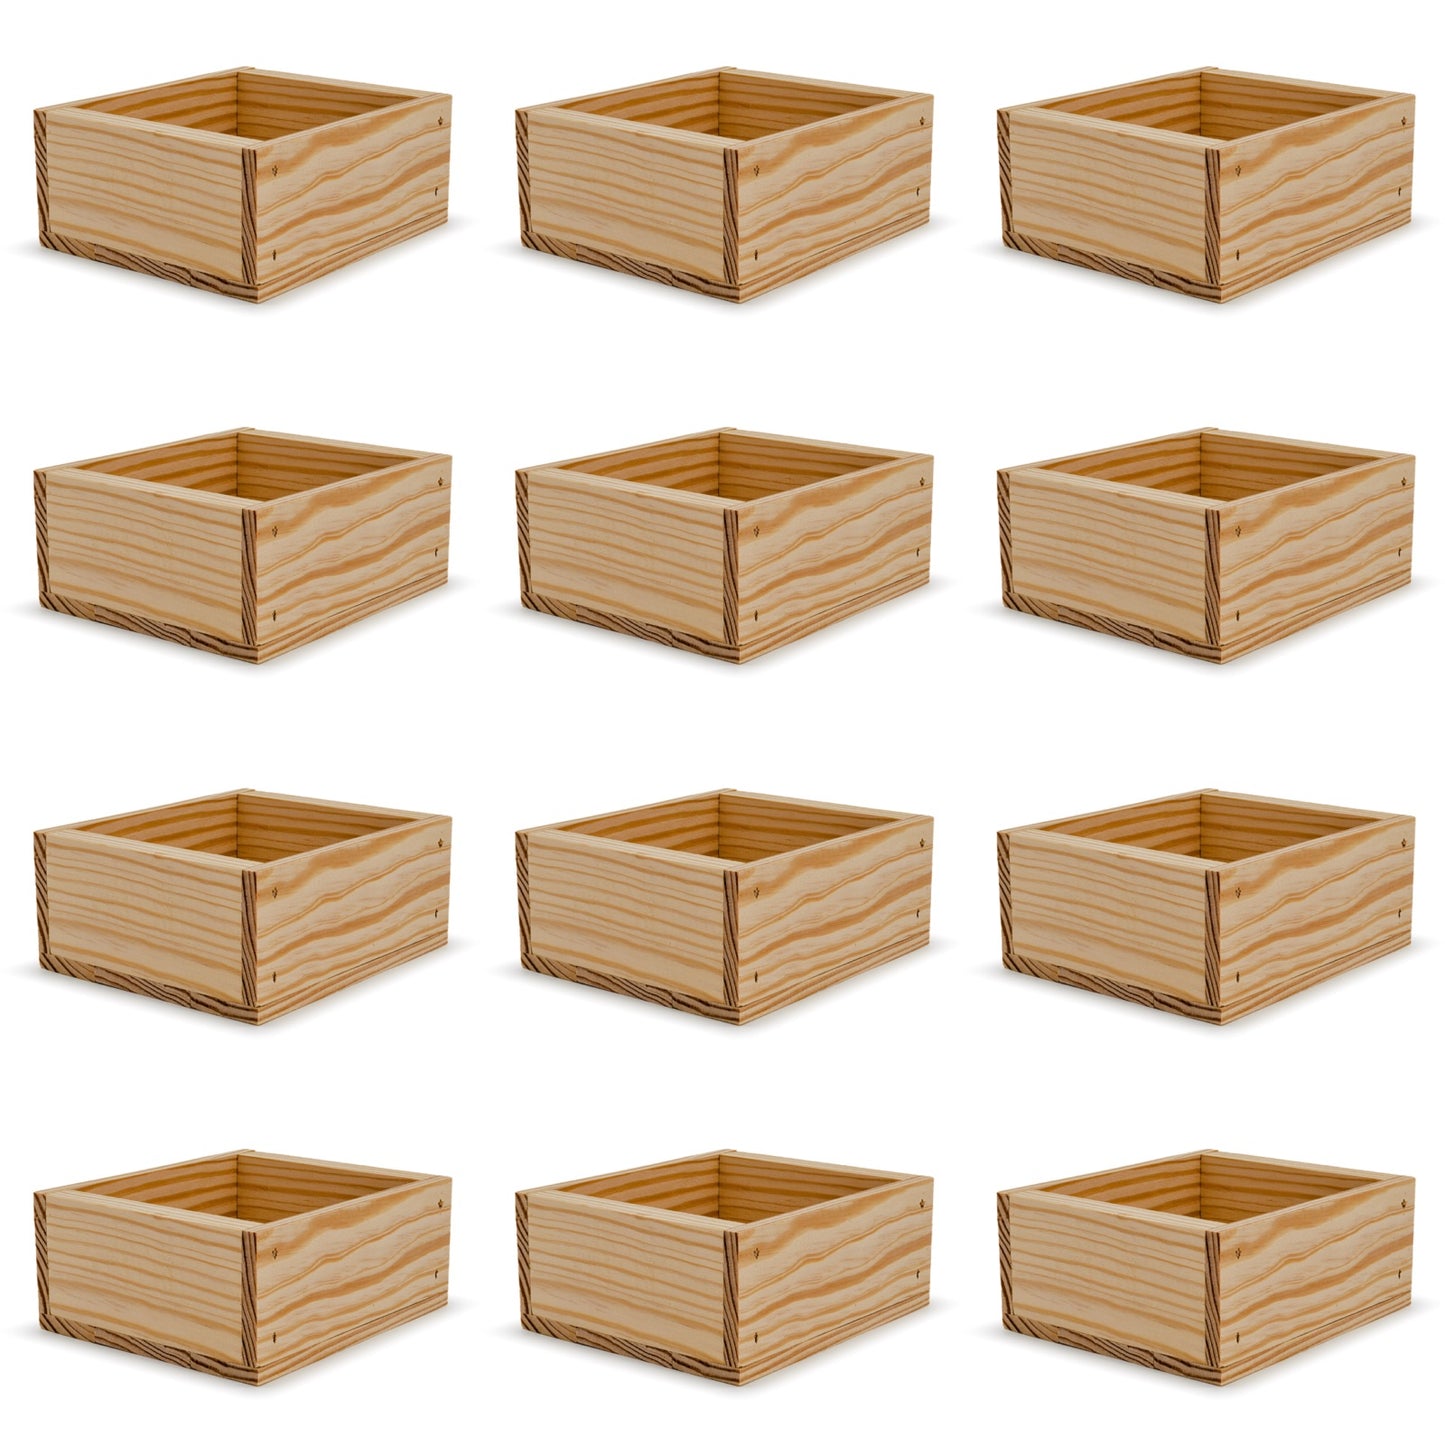 12 Small wooden crates 6x5.5x2.75